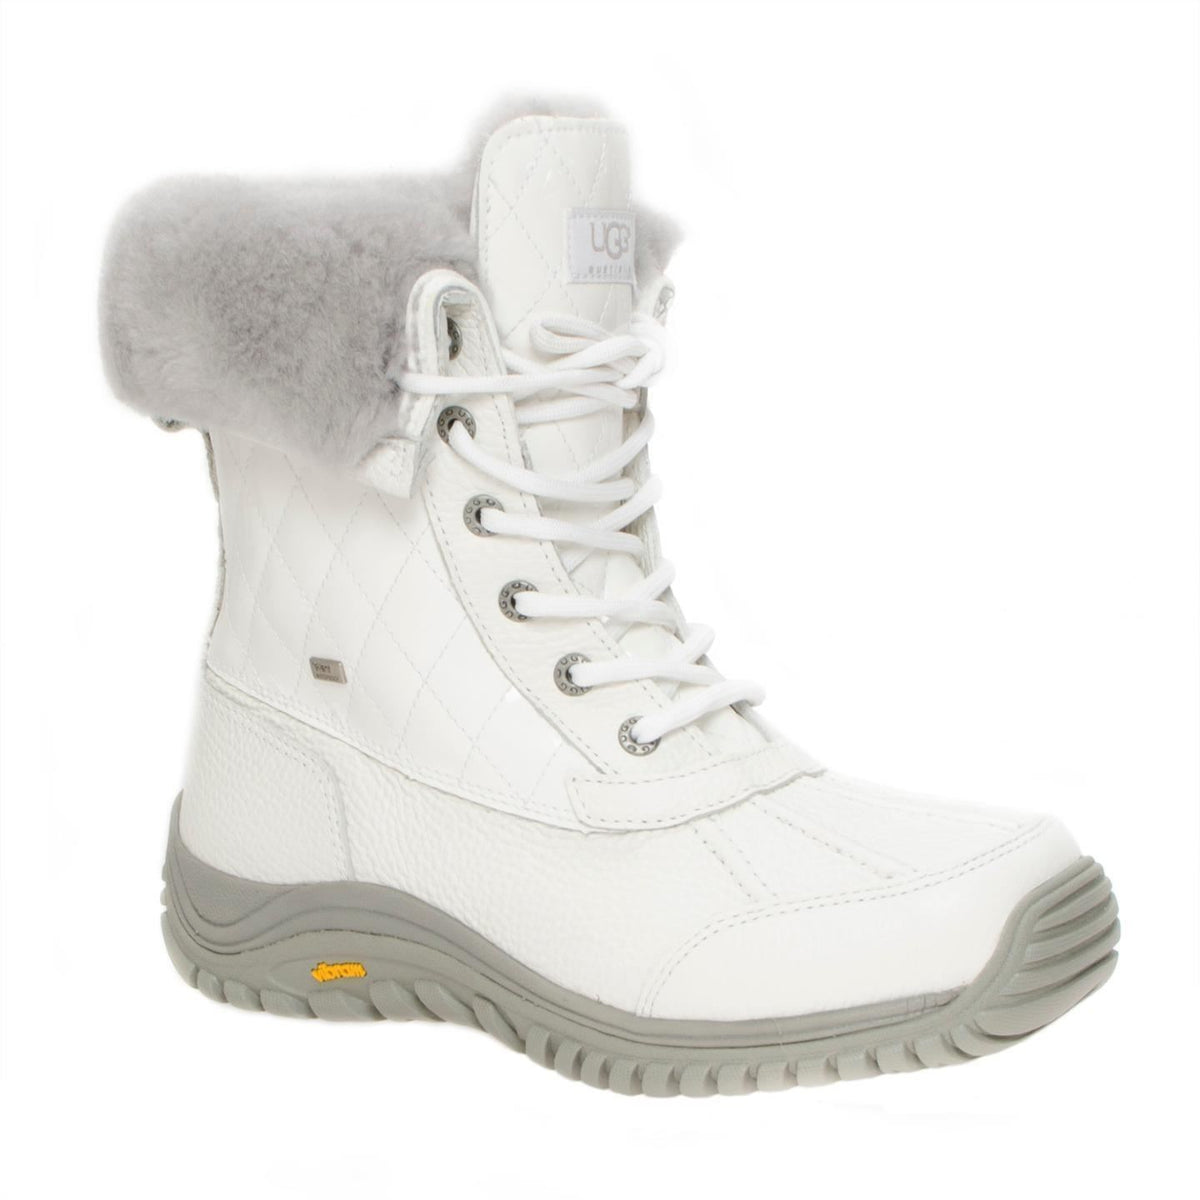 UGG Adirondack Quilted White Boots – MyCozyBoots